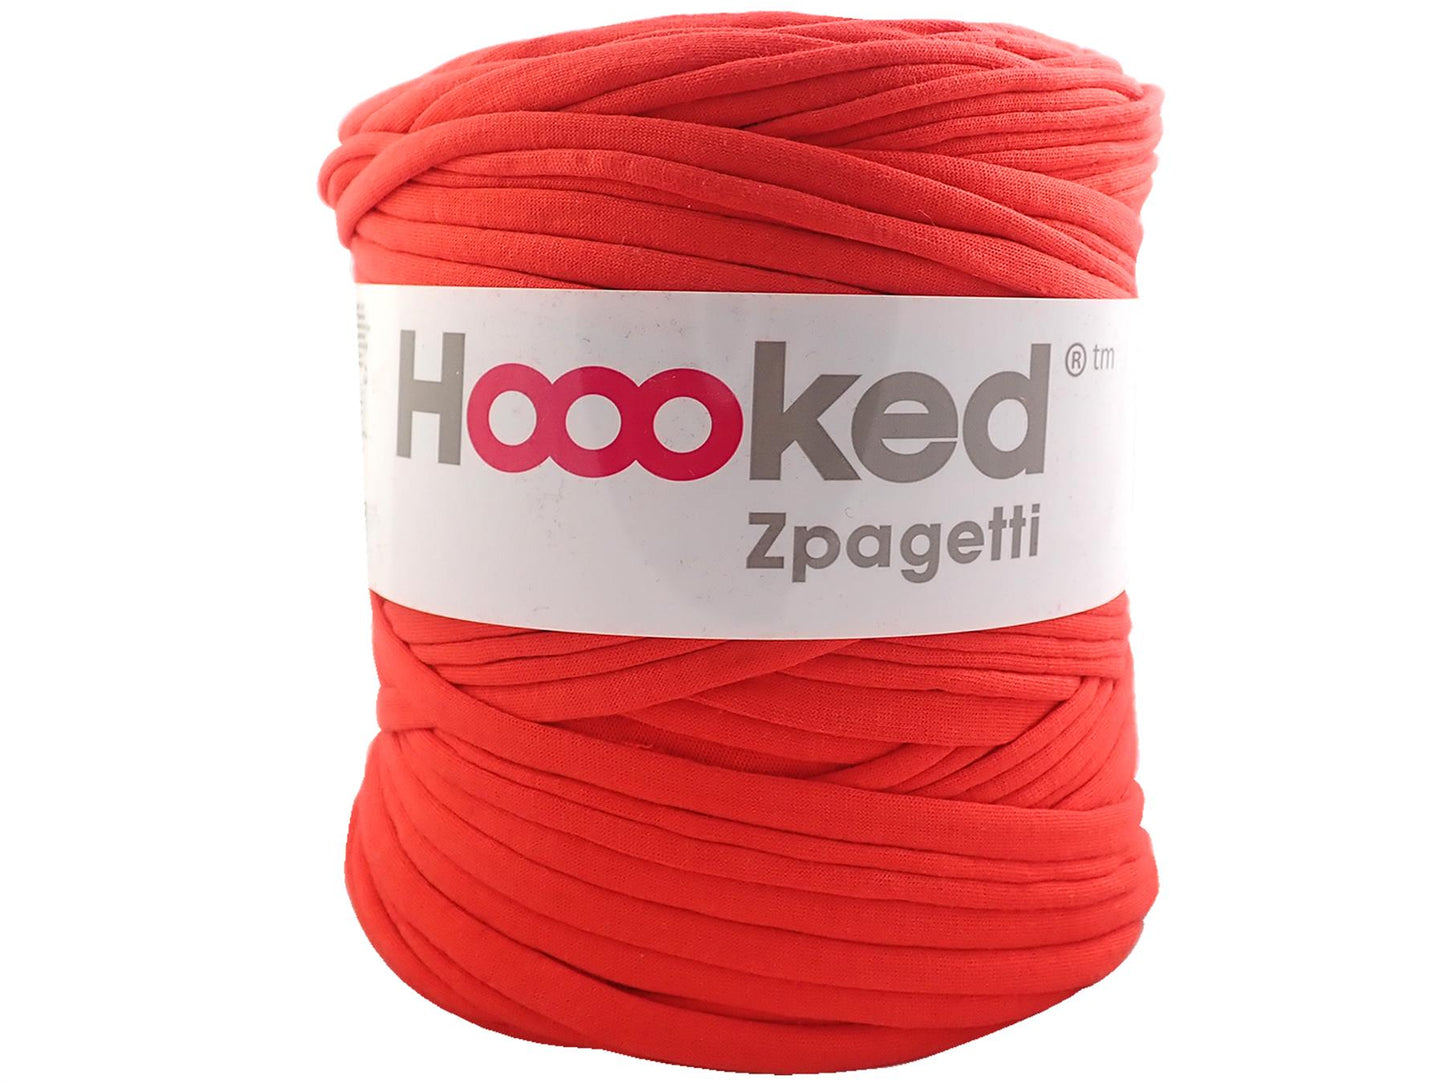 Hoooked Zpagetti Bright Red Cotton T-Shirt Yarn - 120M 700g